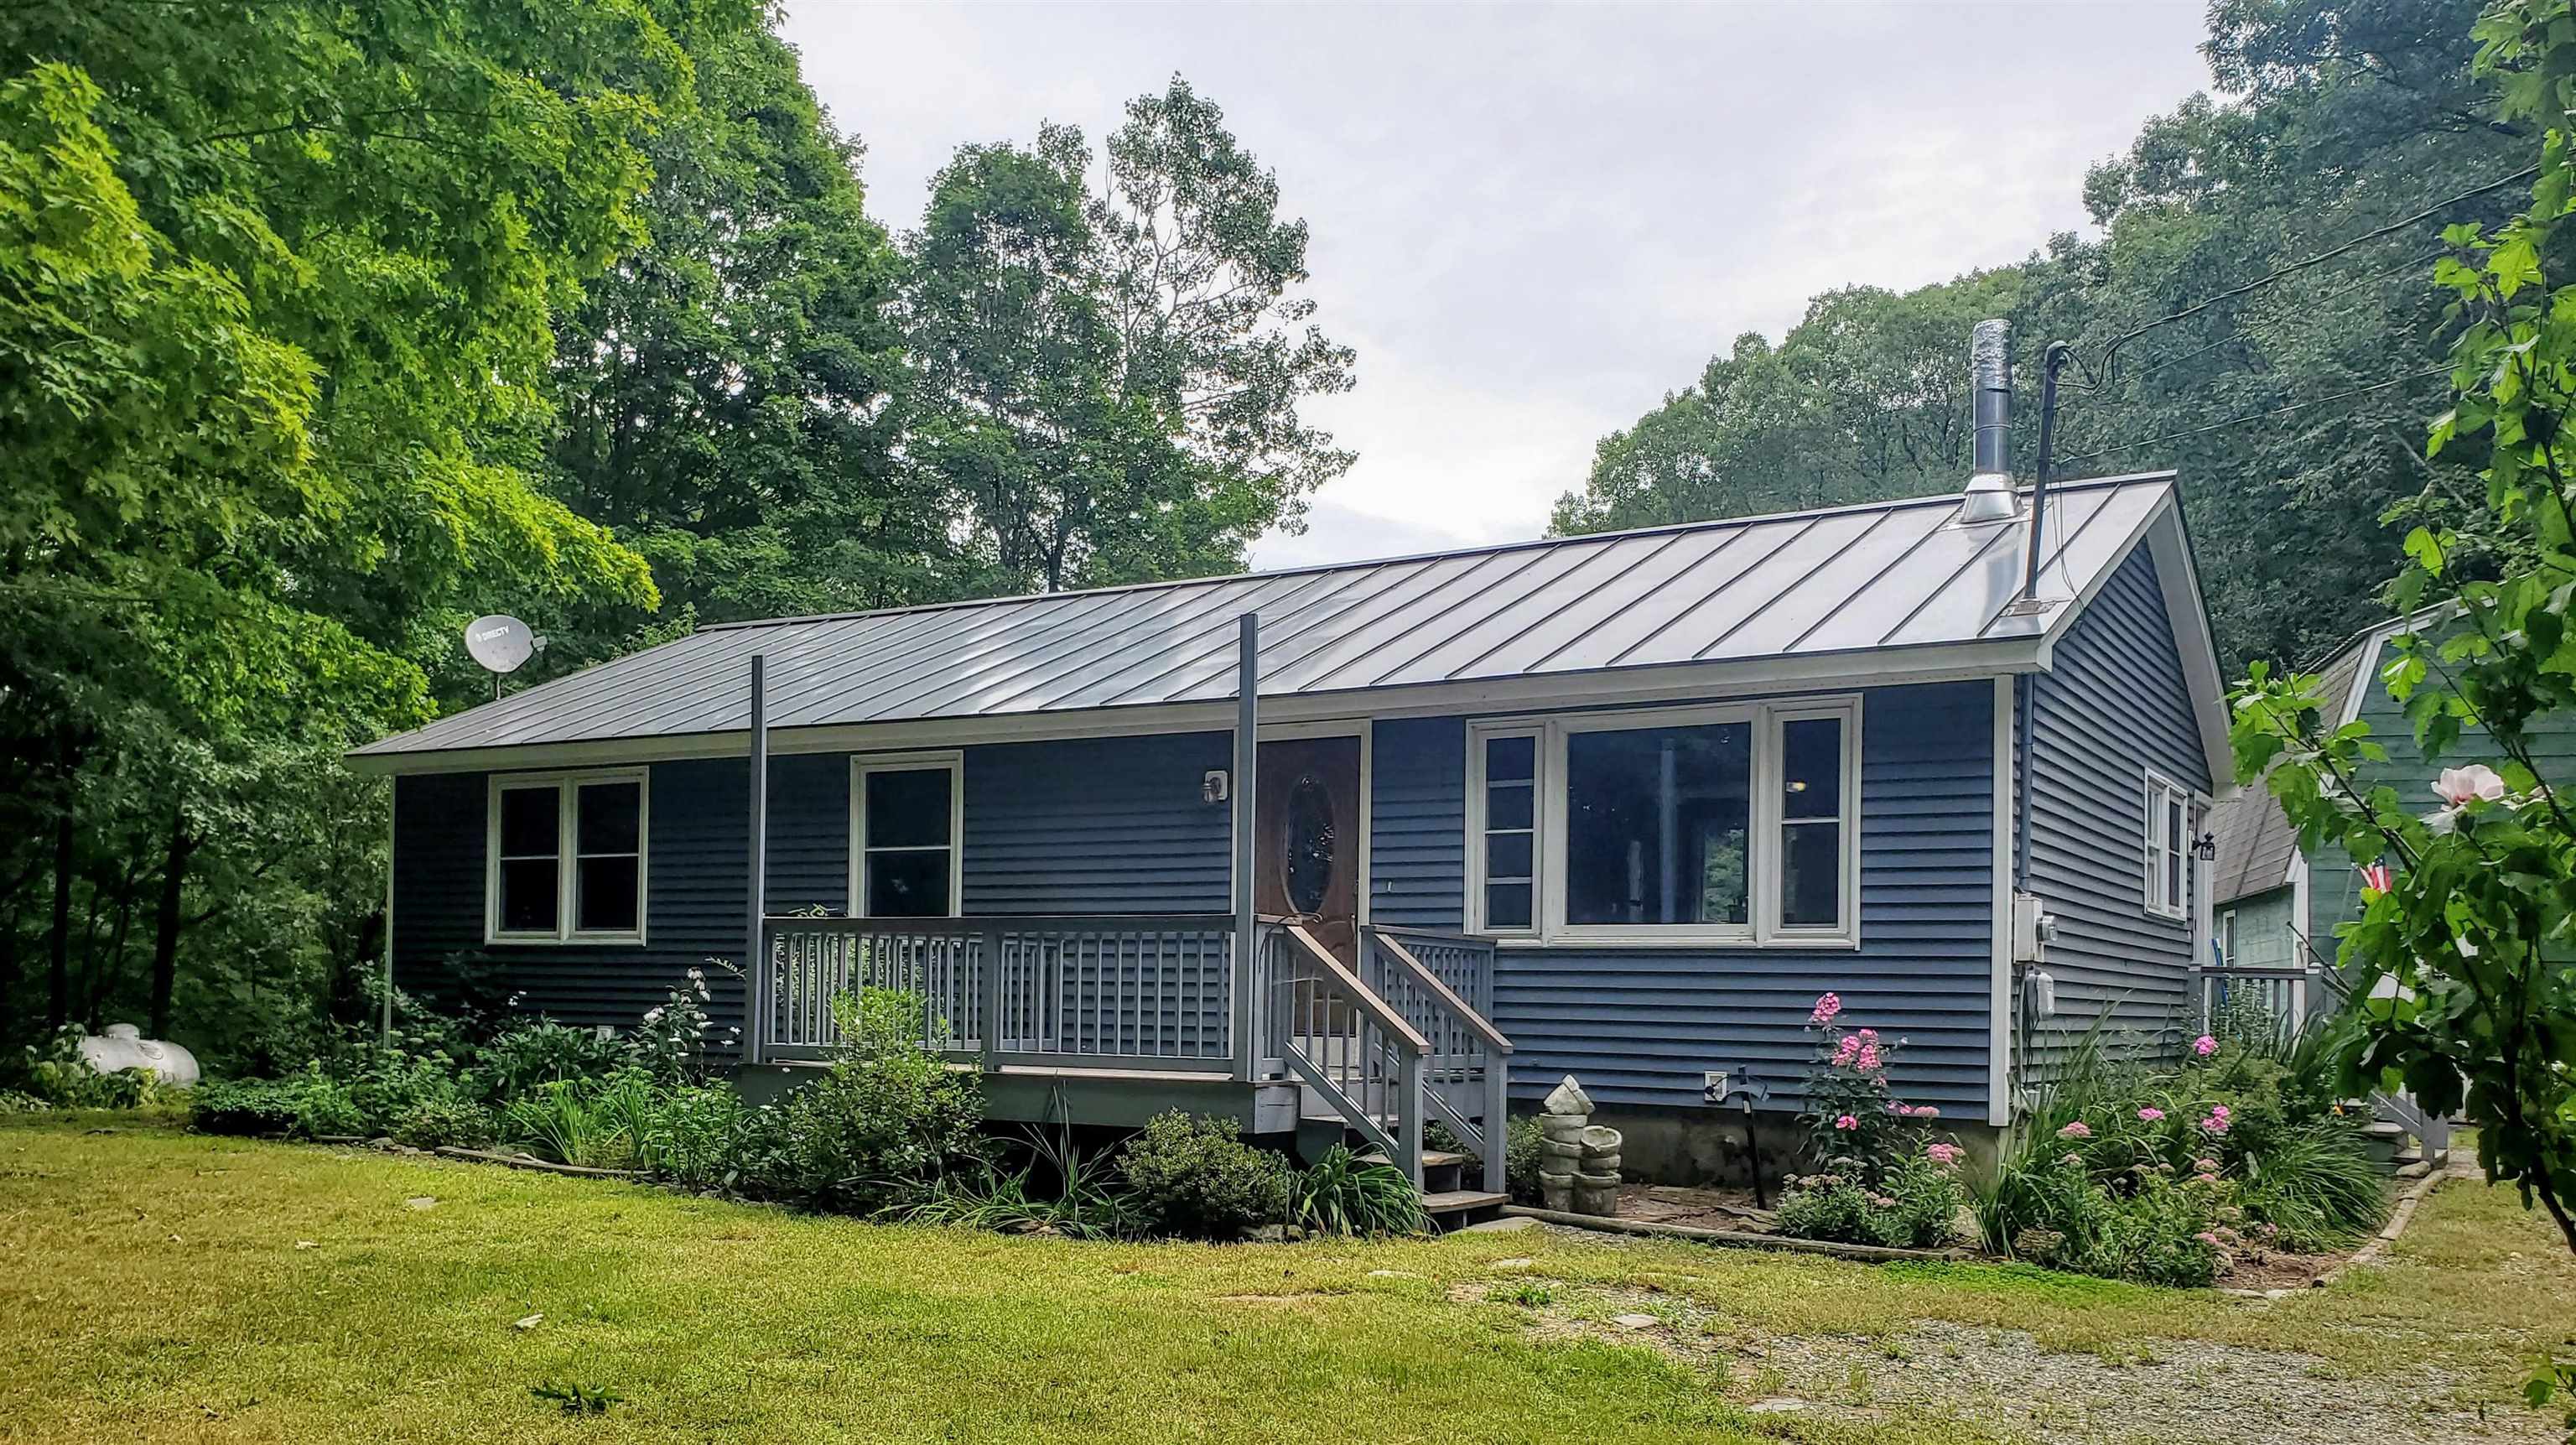 Cornish NH 03745 Home for sale $List Price is $299,000